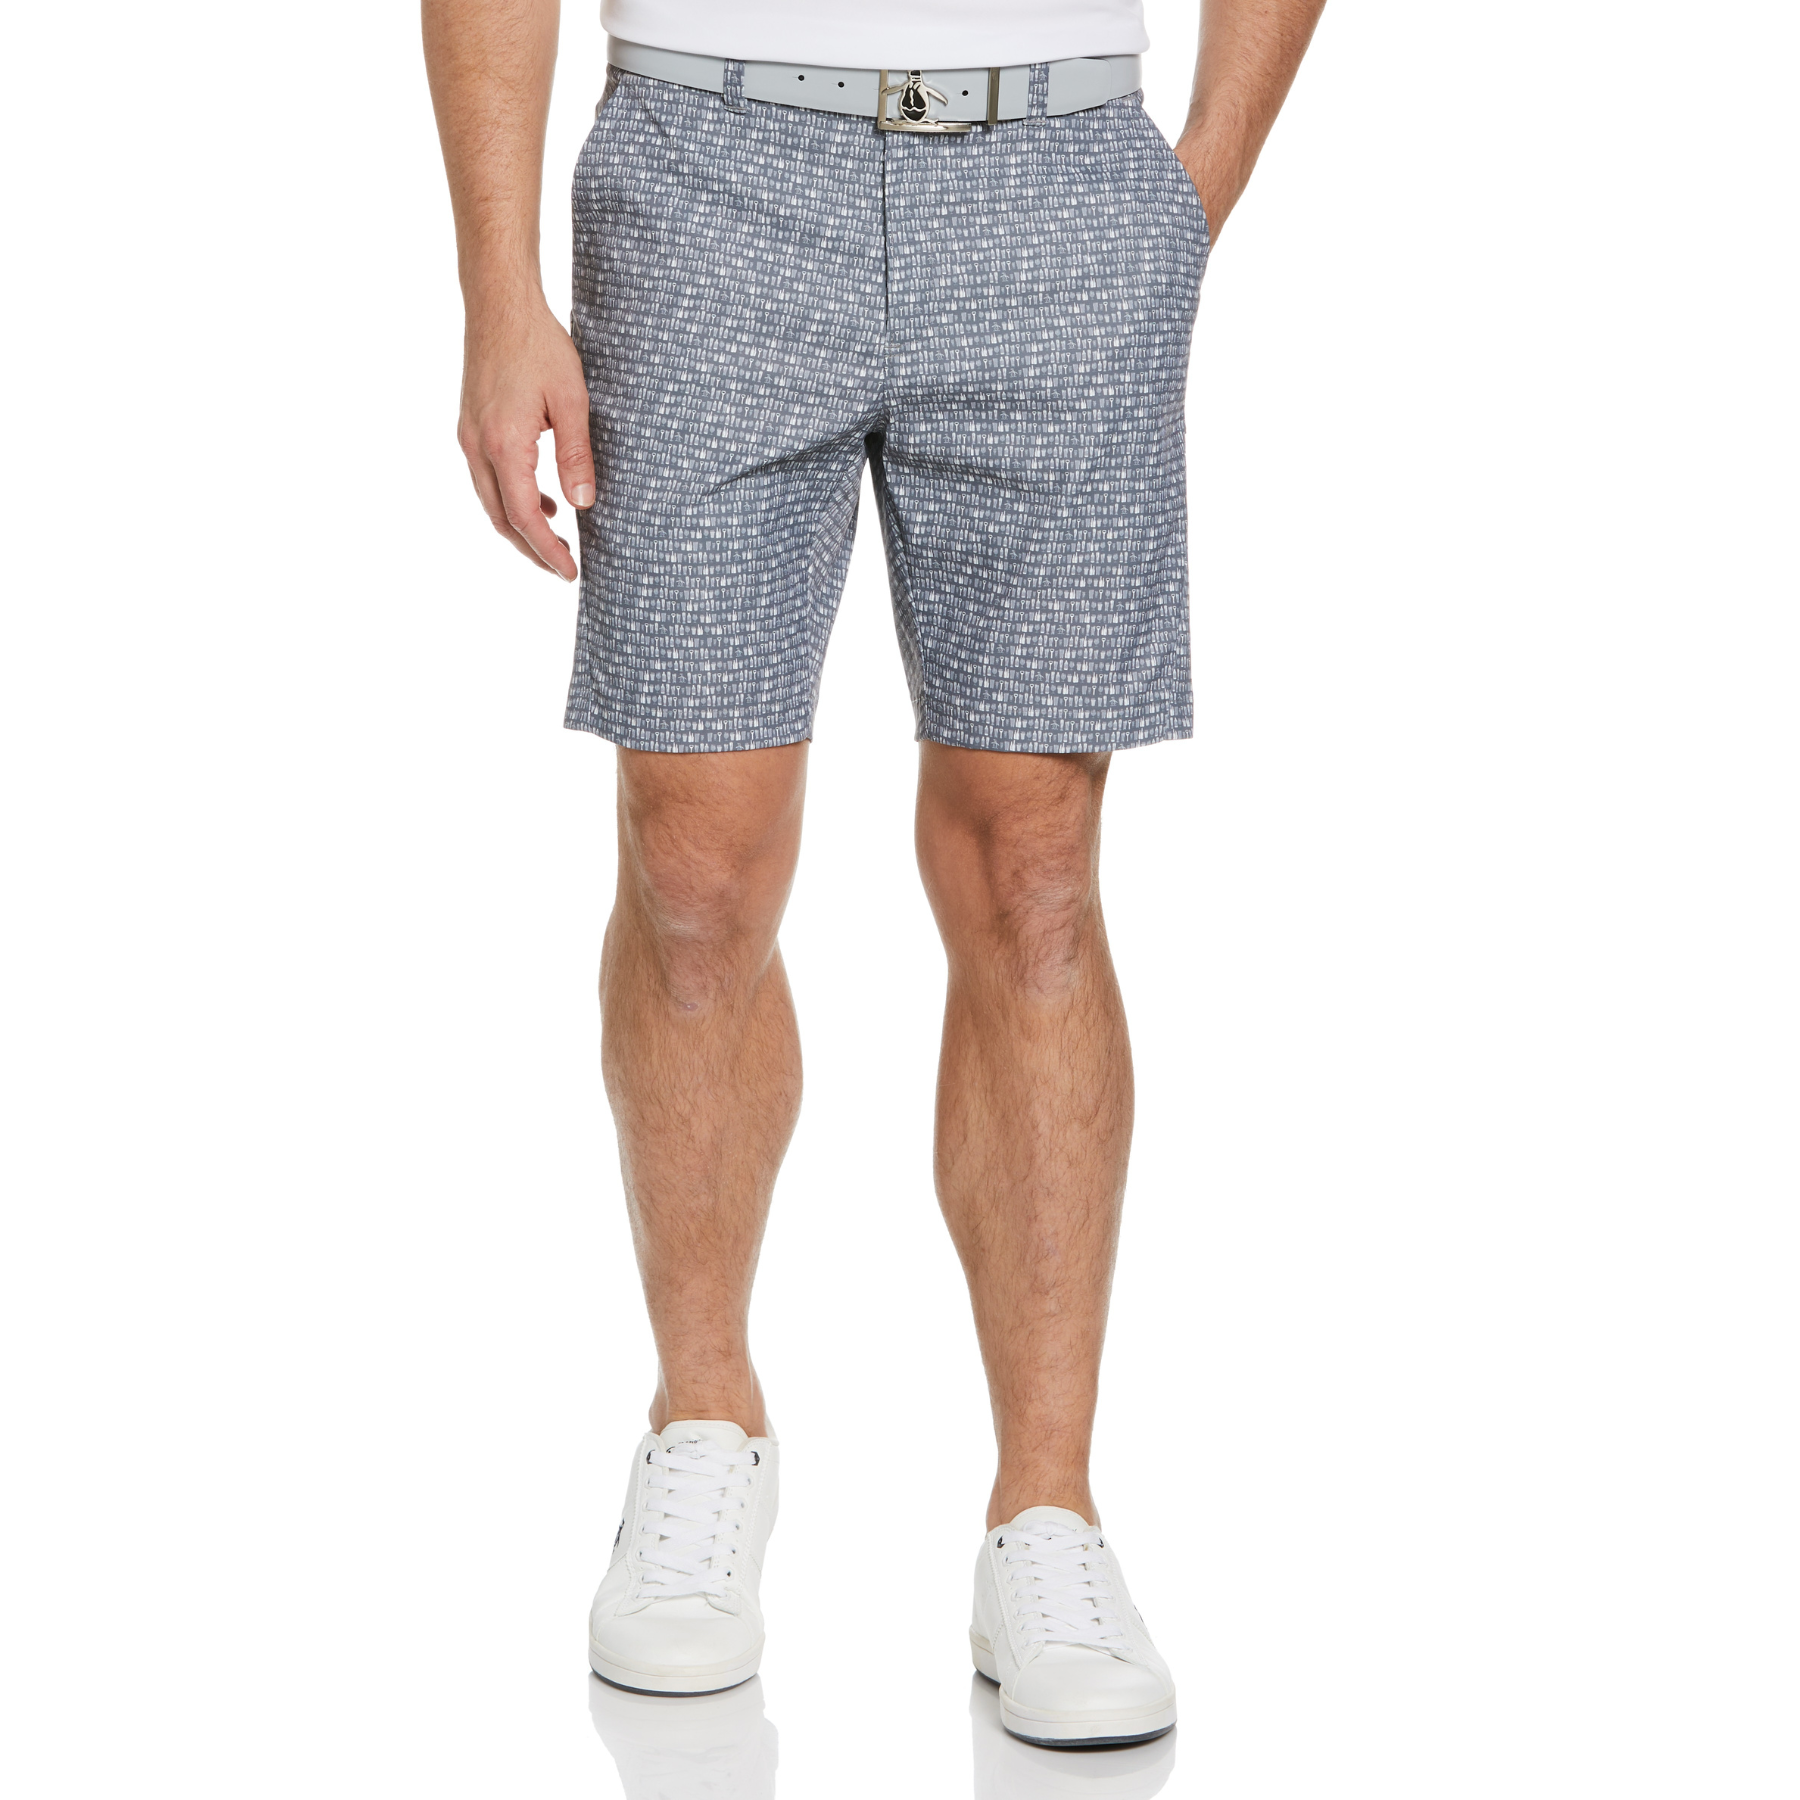 View Novelty Printed Cargo Golf Shorts In Quiet Shade information